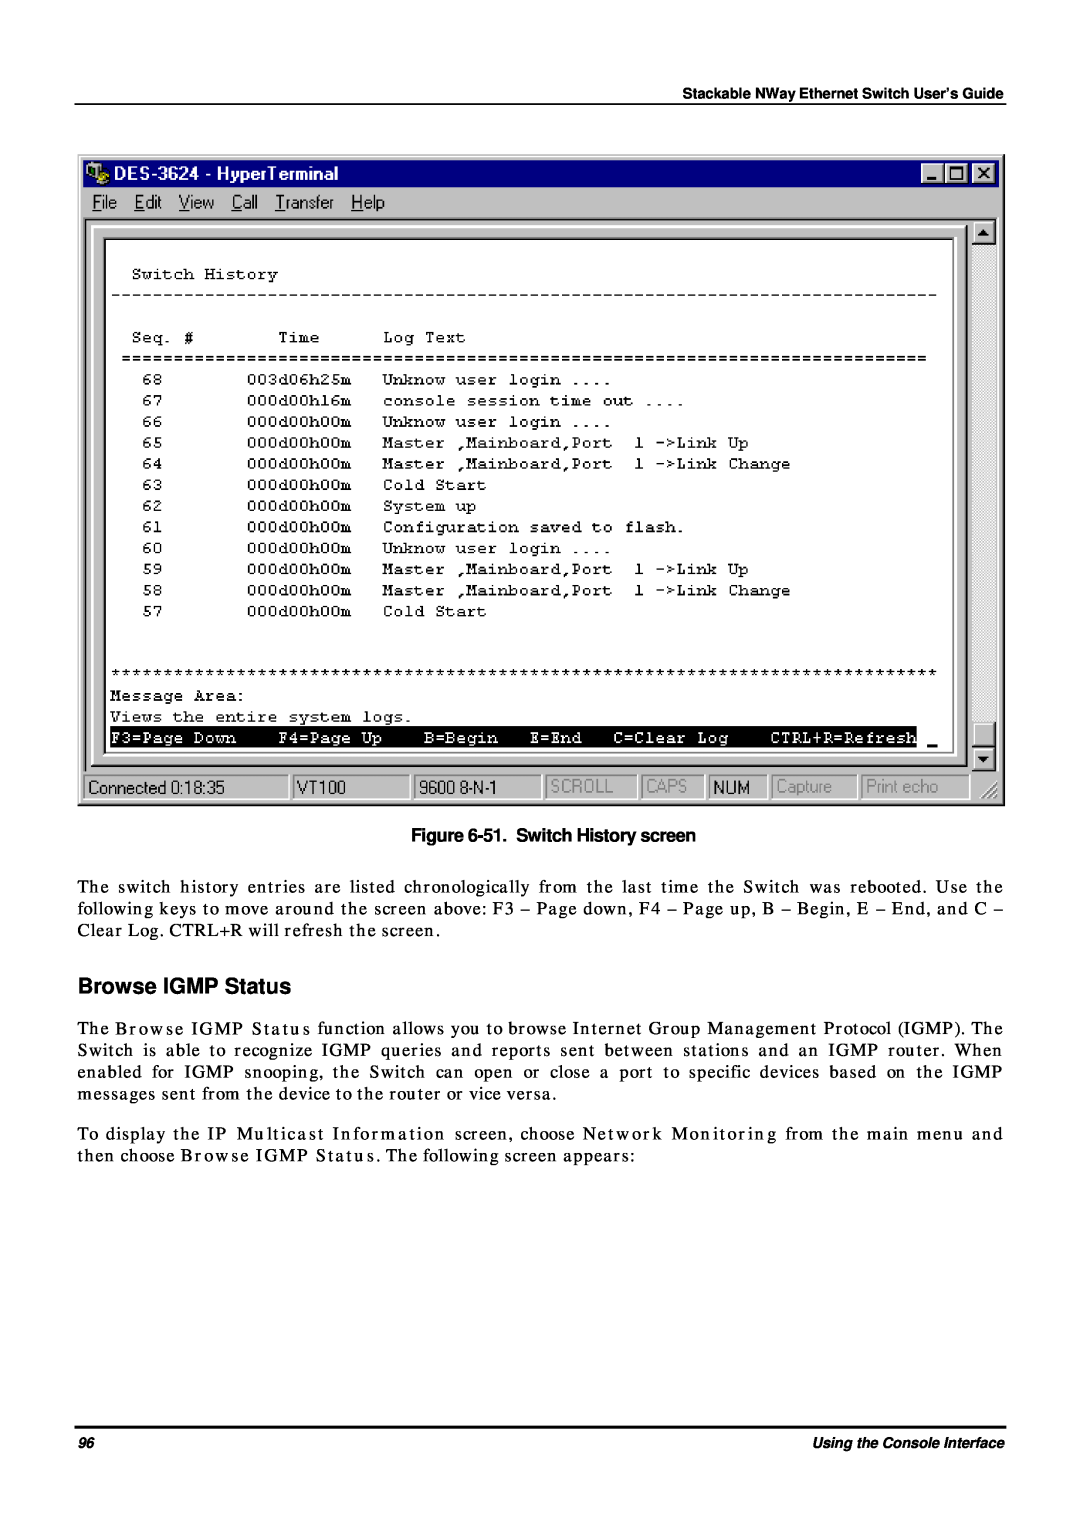 D-Link DES-3624 manual Browse IGMP Status, 51. Switch History screen 